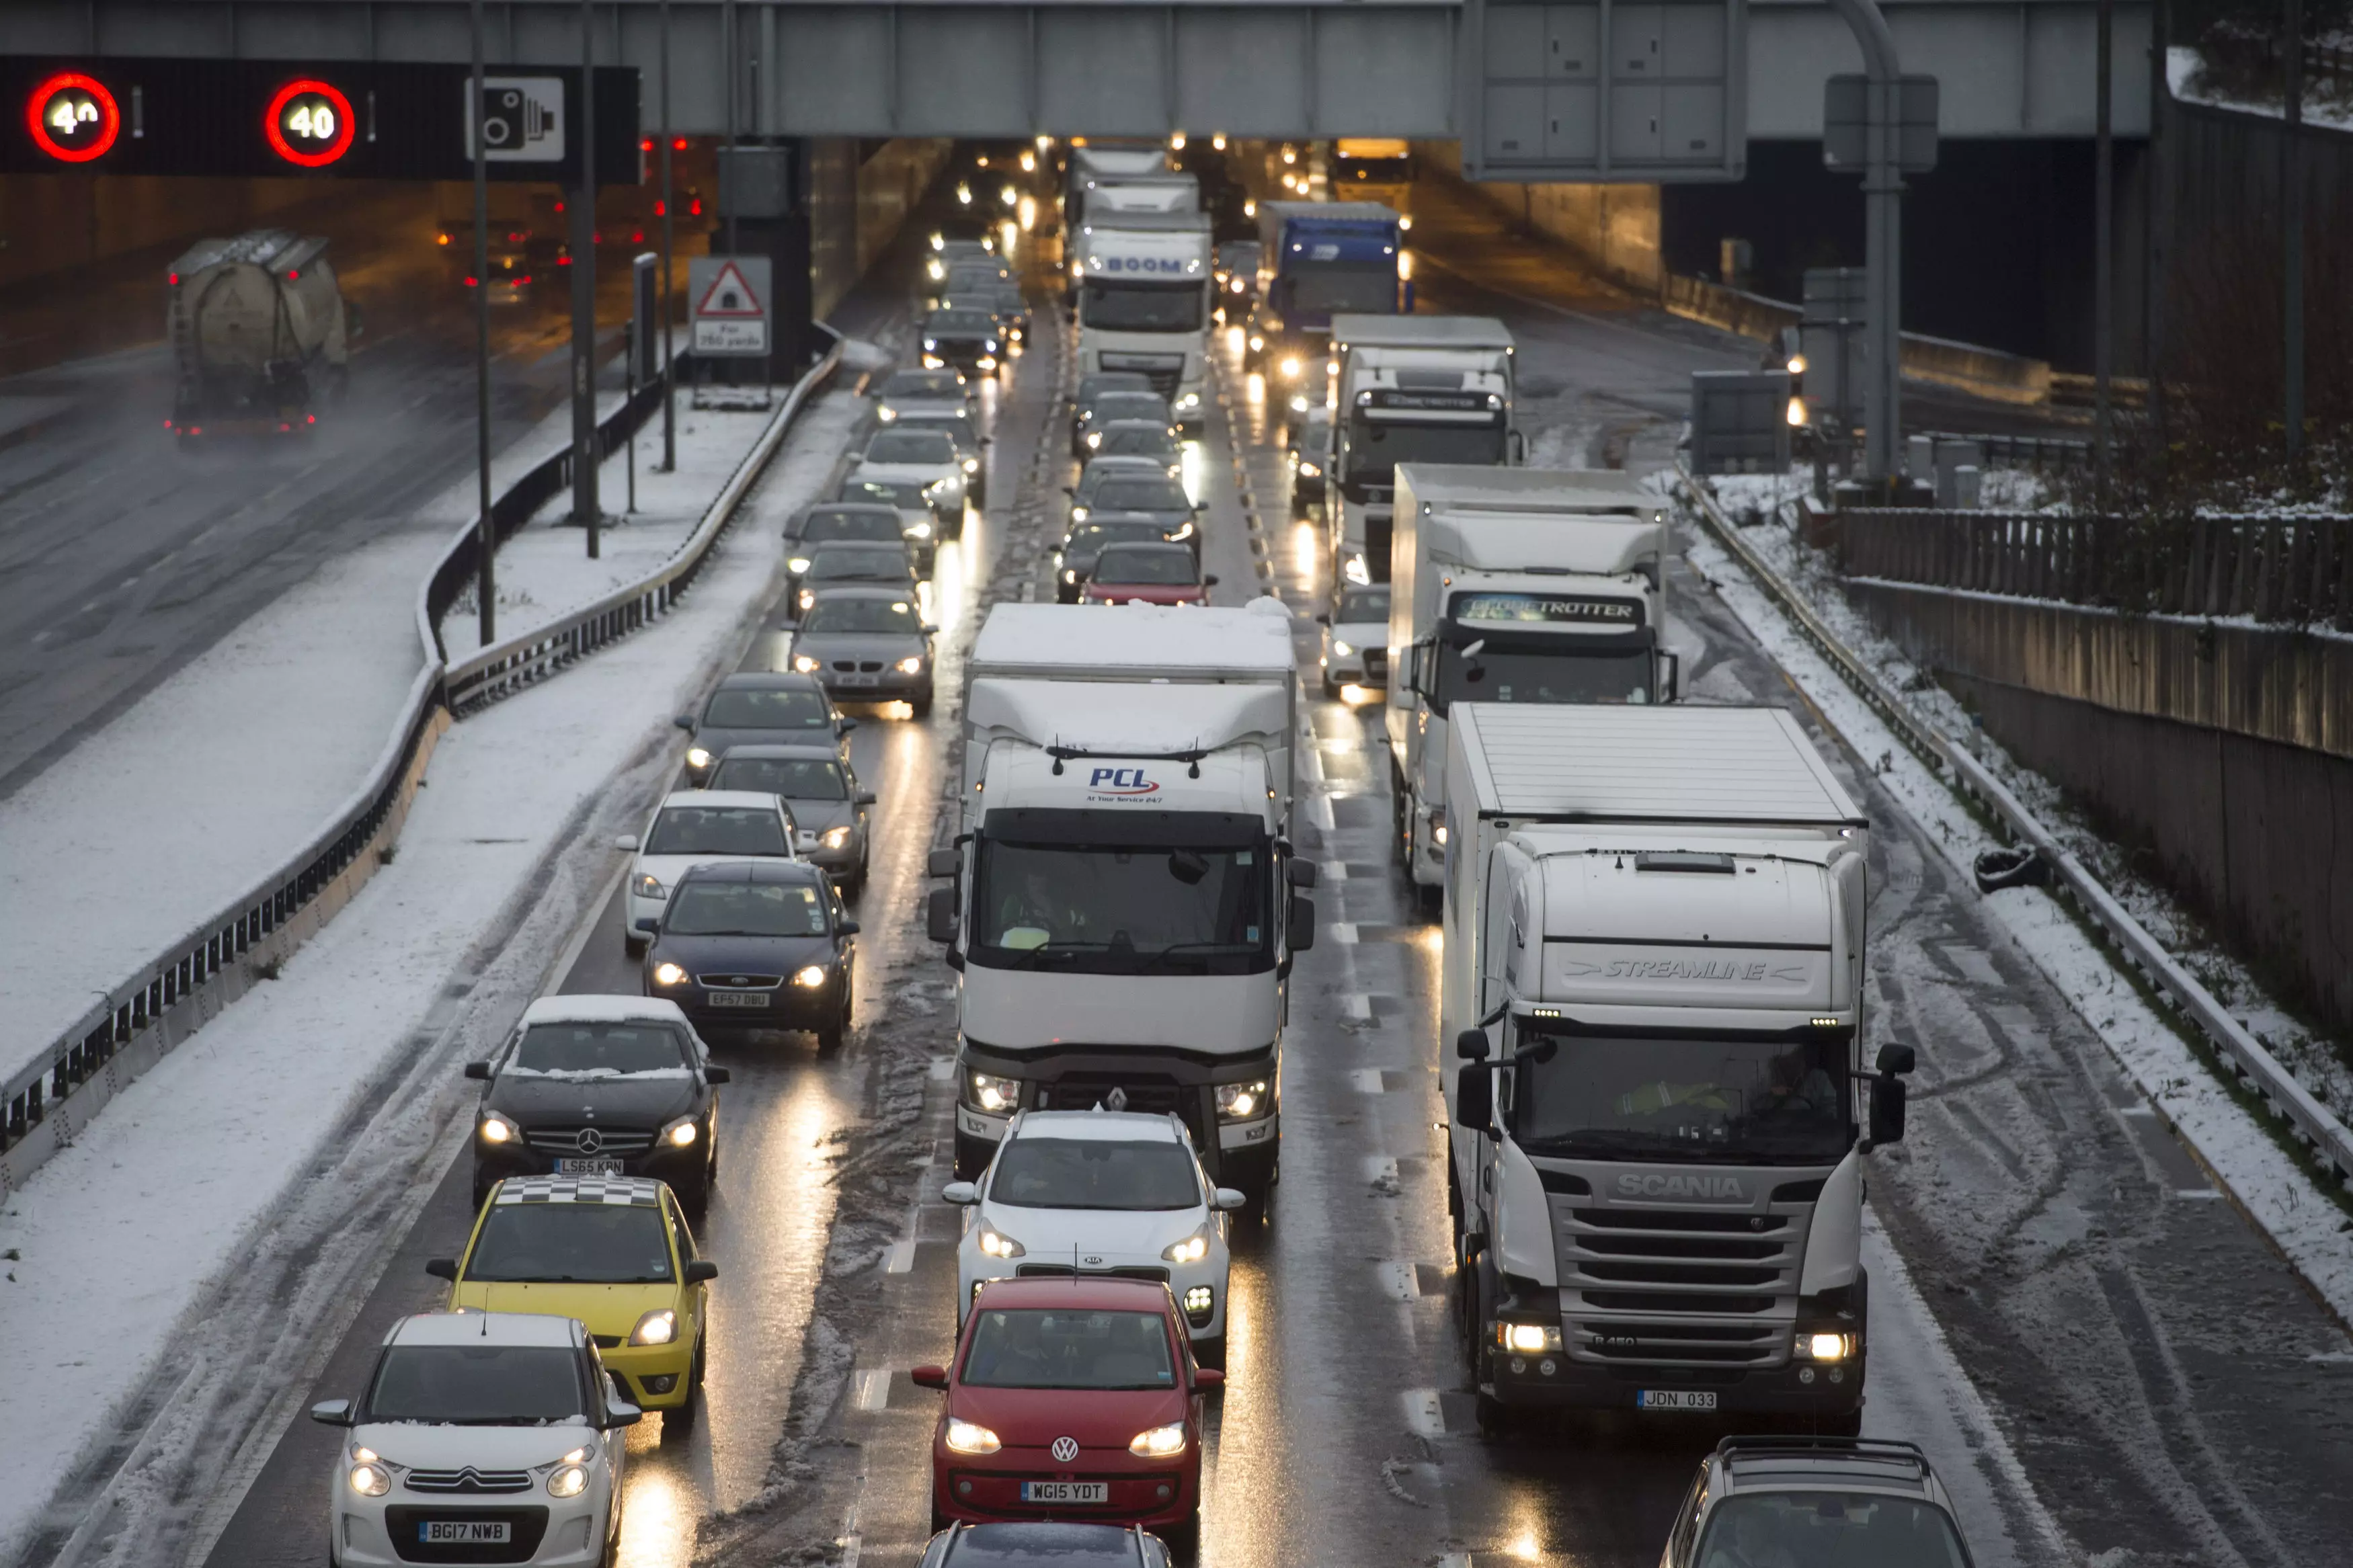 Drivers said people who drive slowly should have to complete an awareness course.